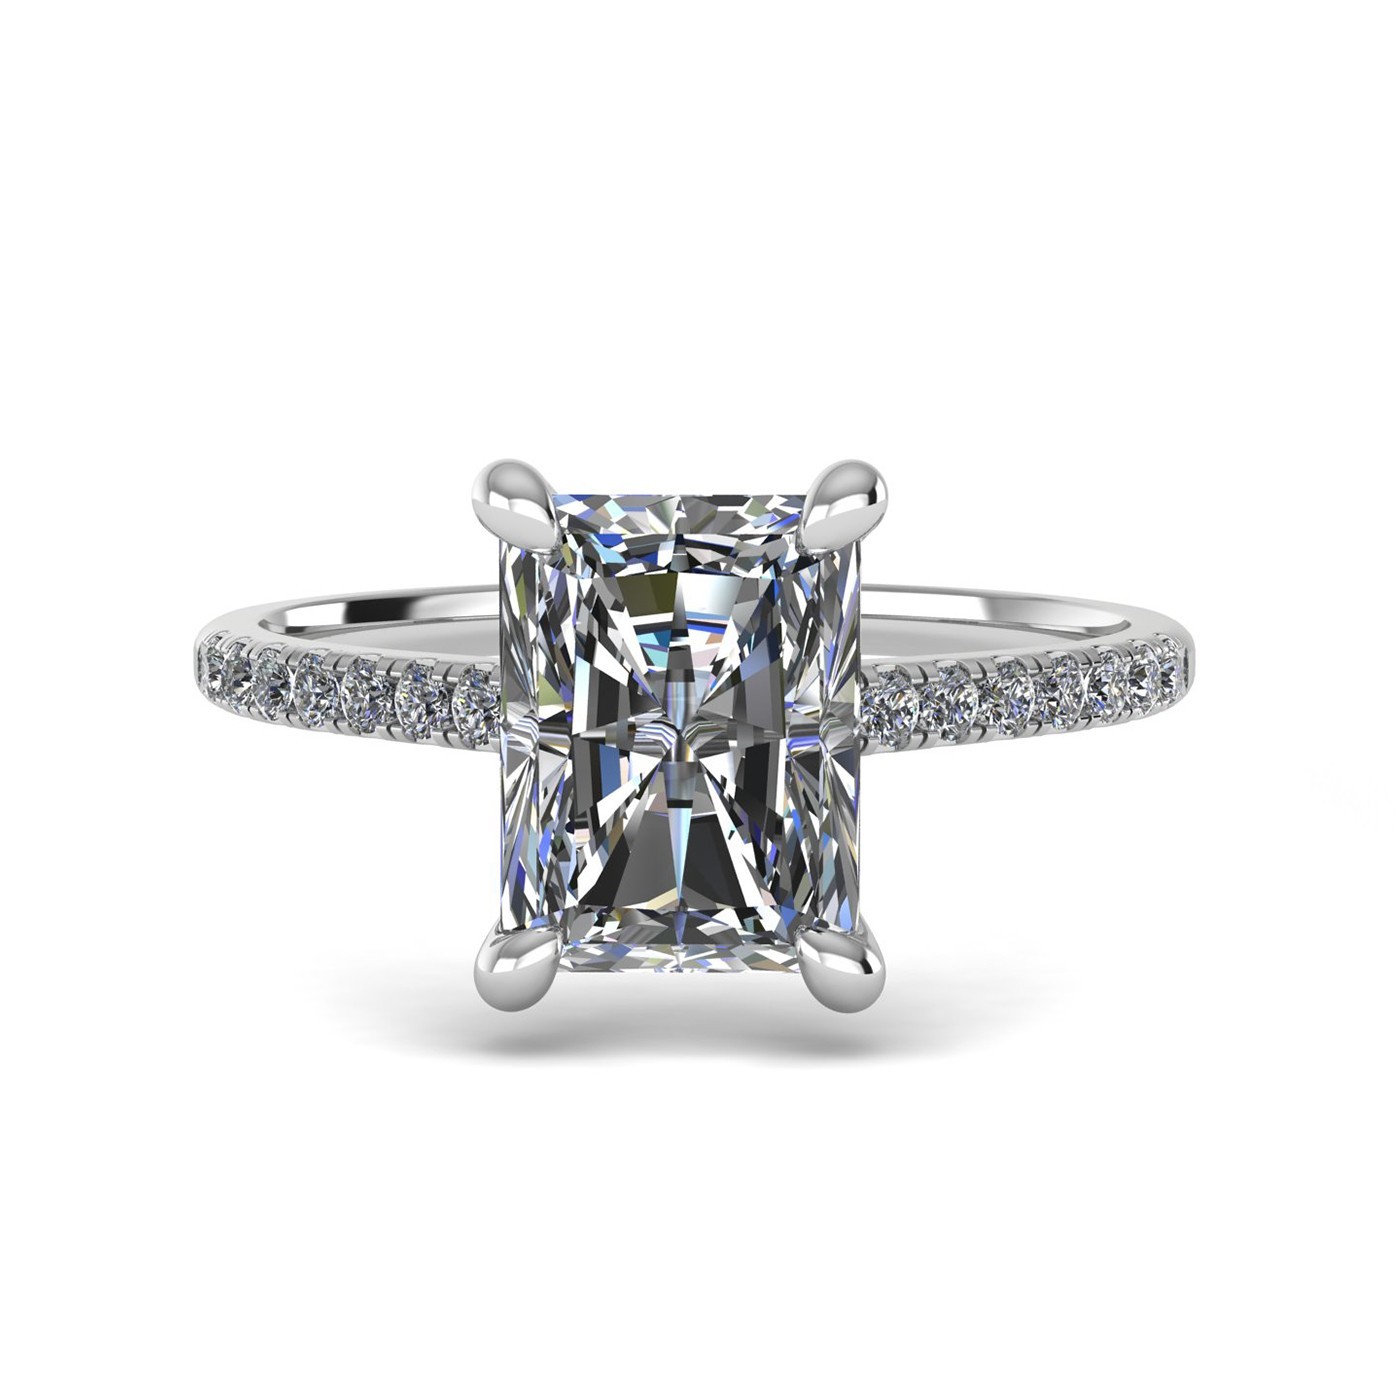 18k white gold  0,80 ct 4 prongs radiant cut diamond engagement ring with whisper thin pavÉ set band Photos & images